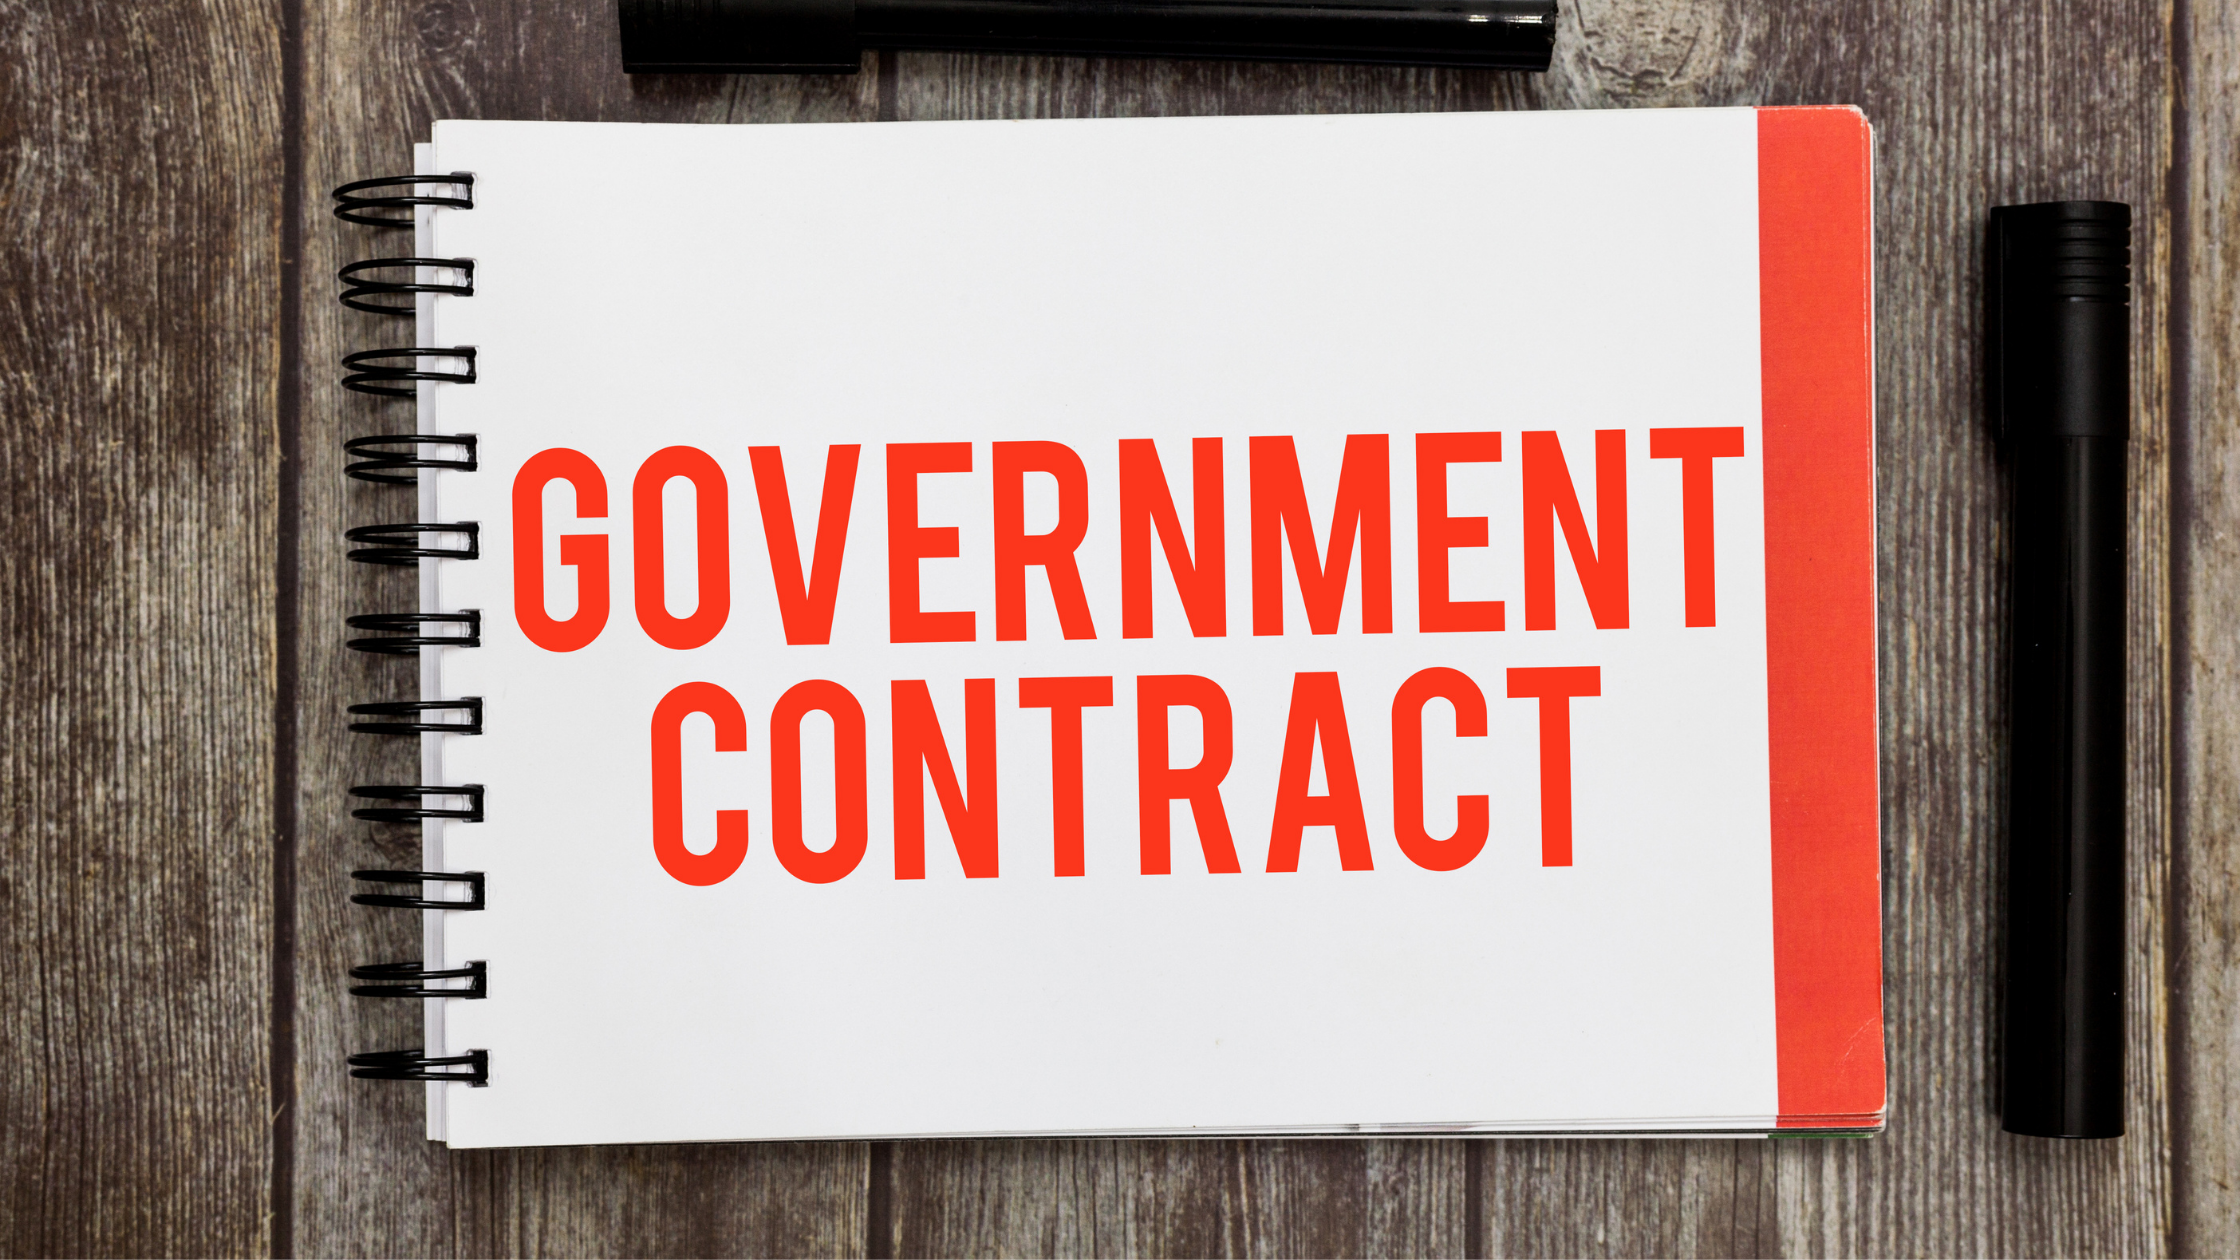 Government Contract Photo Image - Landers Law Group